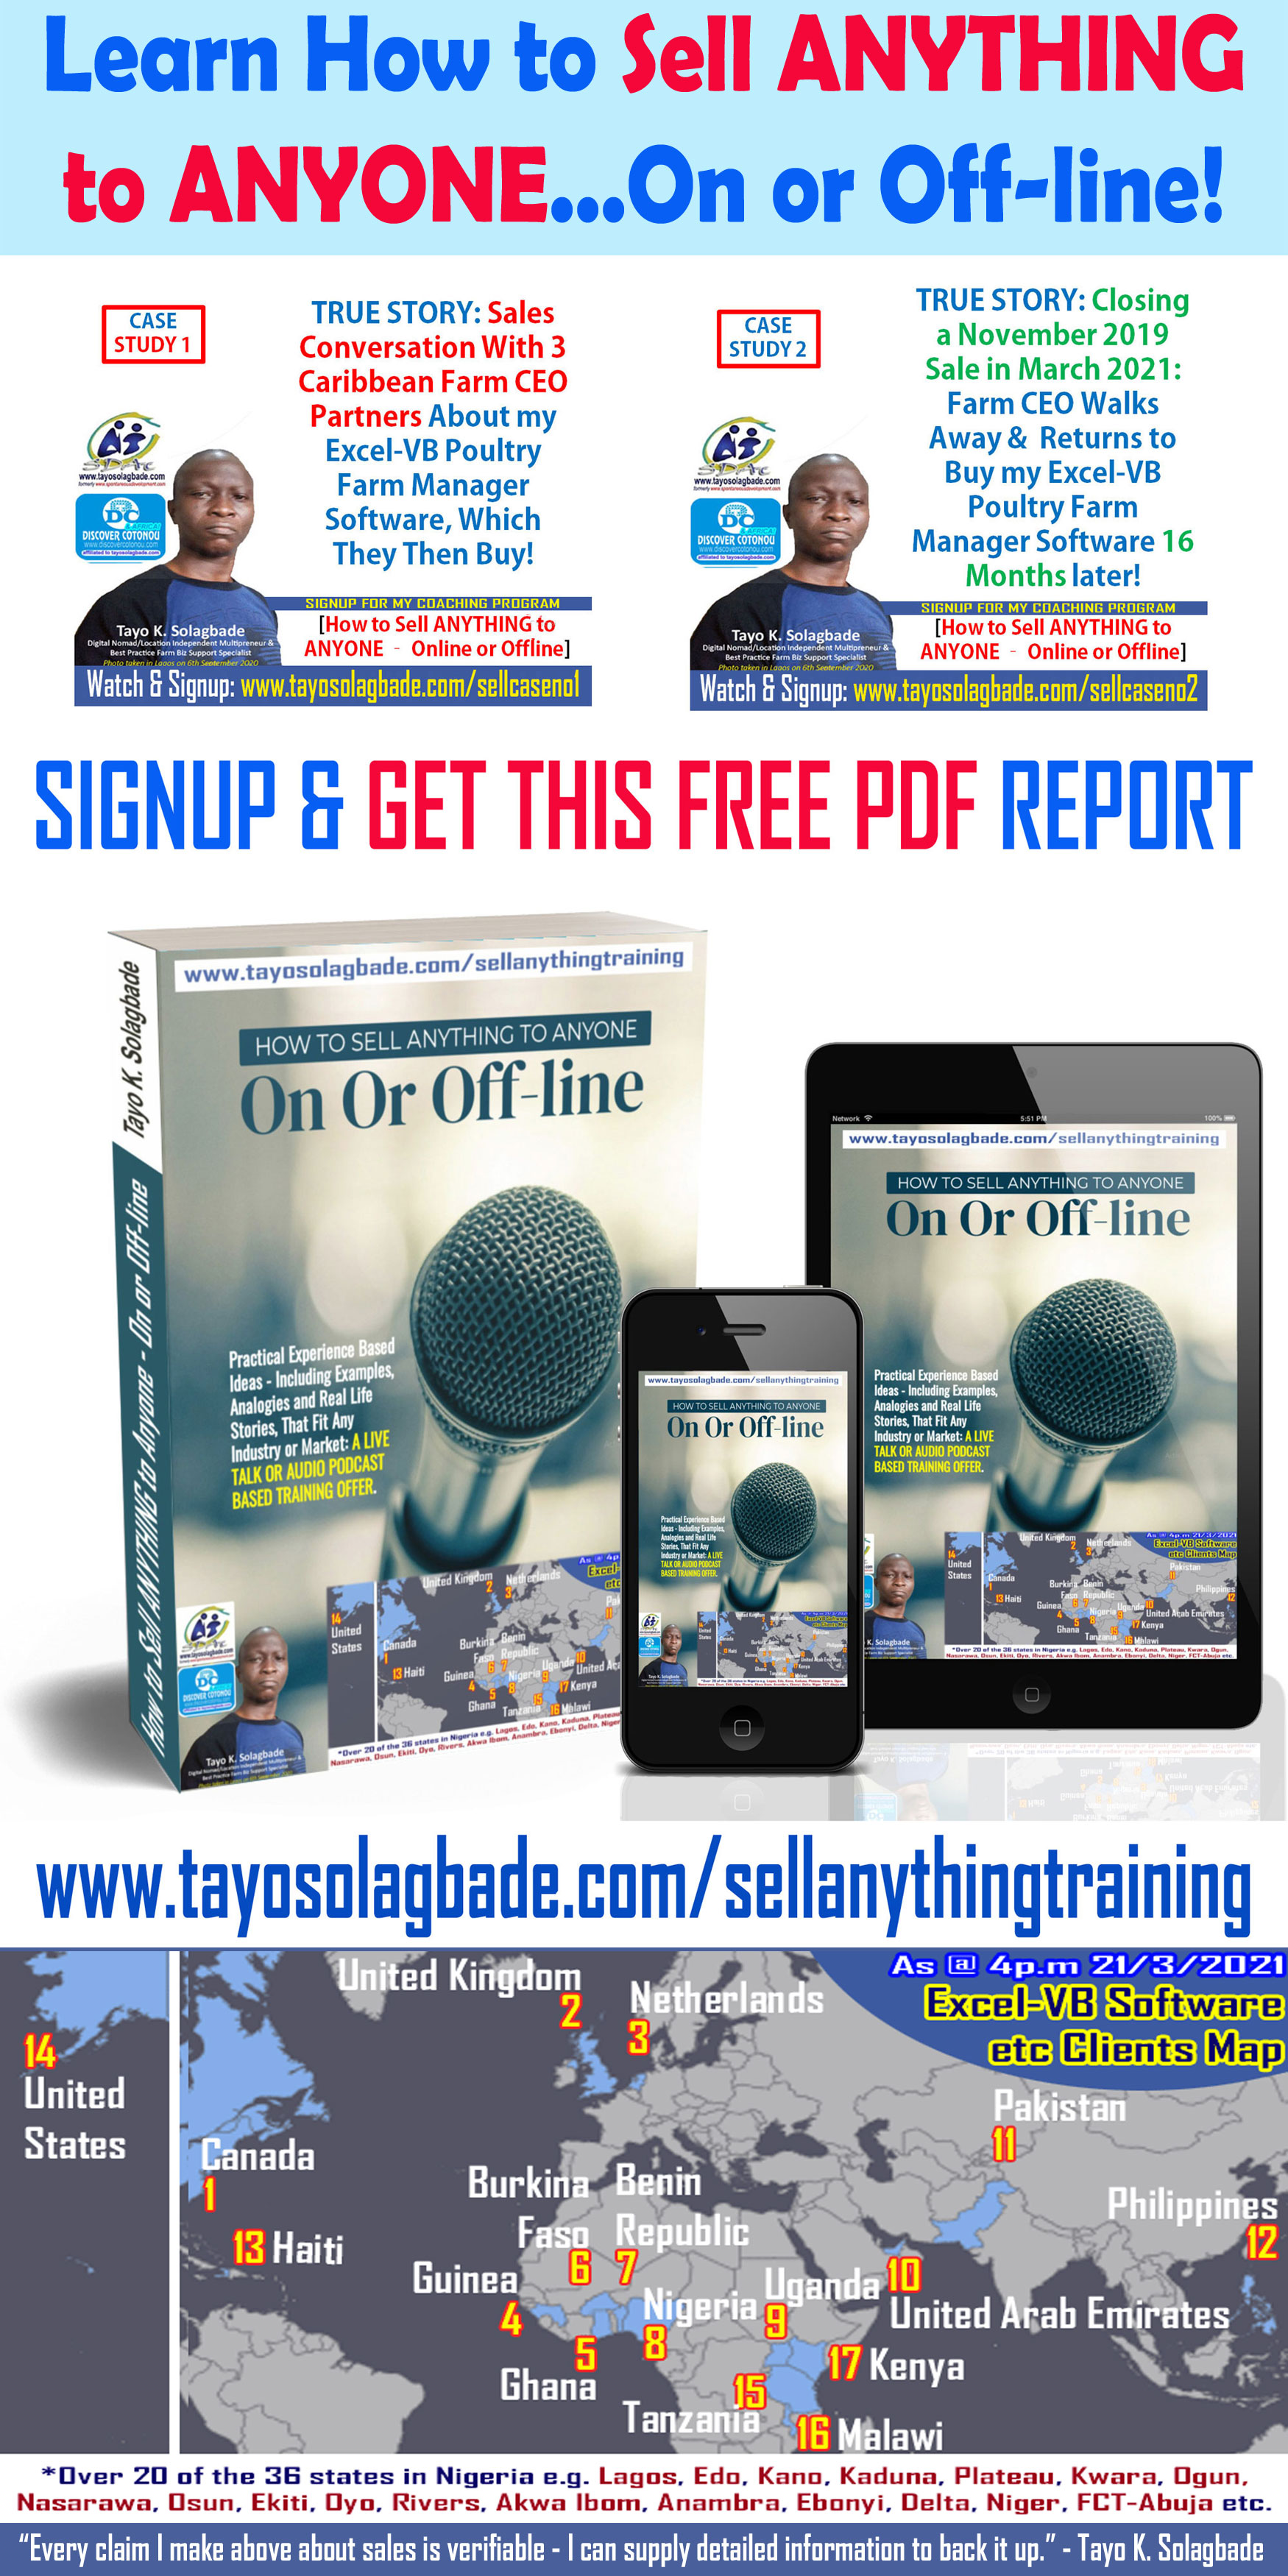 SIGNUP for my Coaching Program via http://www.tayosolagbade.com/contact.htm and I'll send you THIS 9 page PDF Report...CLICK NOW.